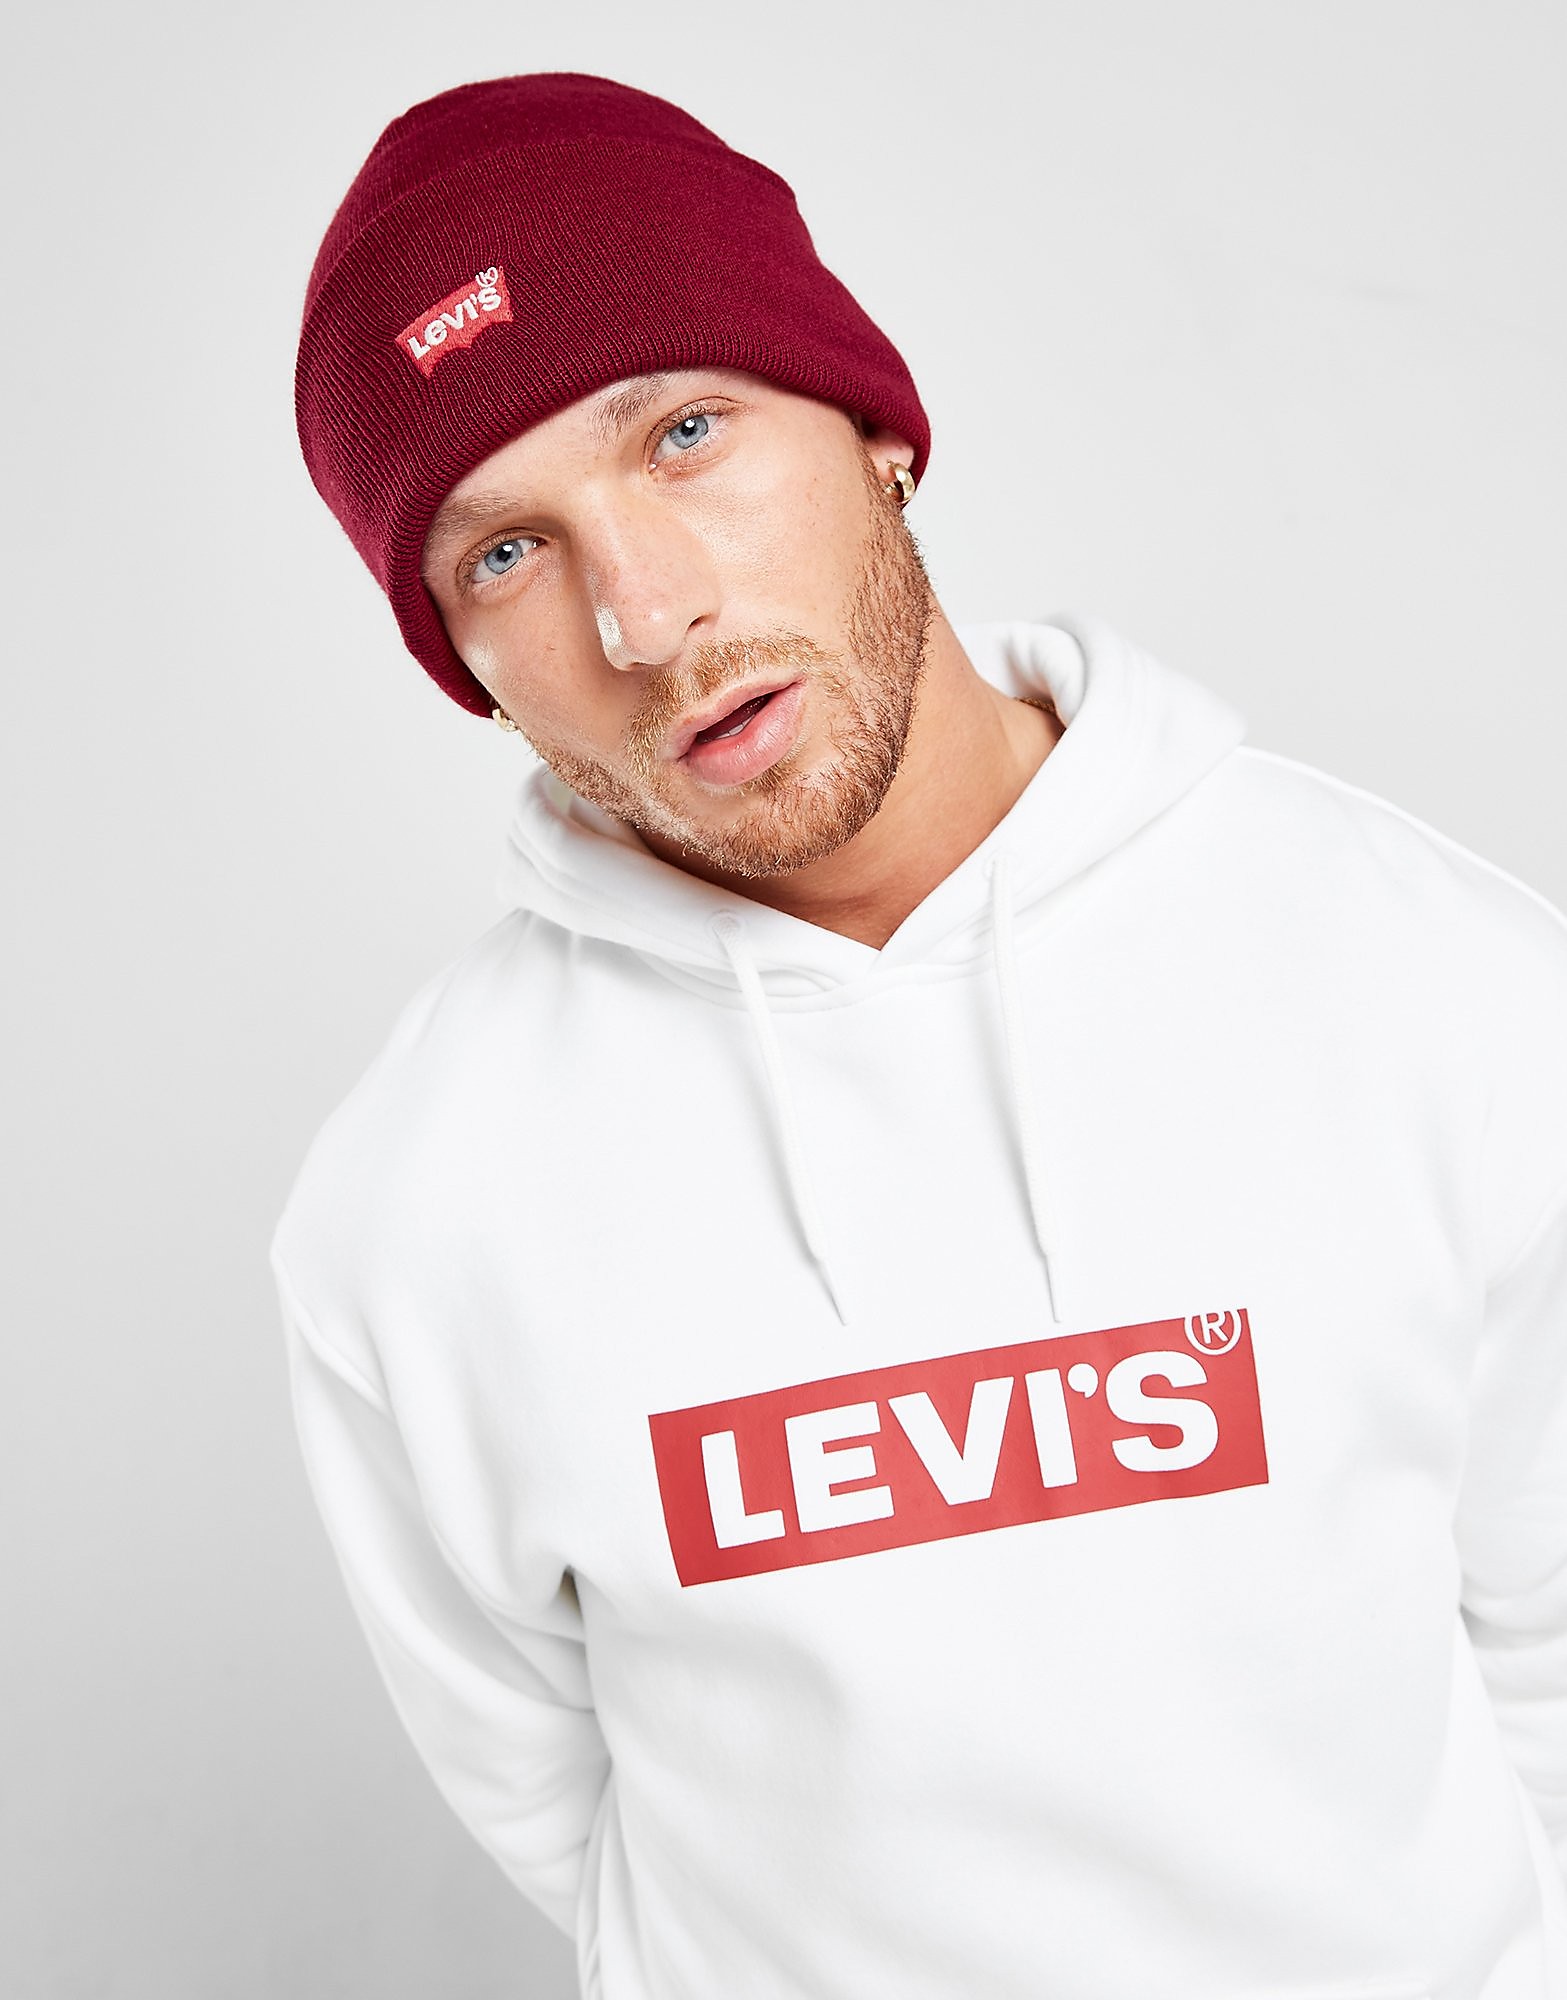 Levis Batwing Cuffed Beanie Hat, Rood